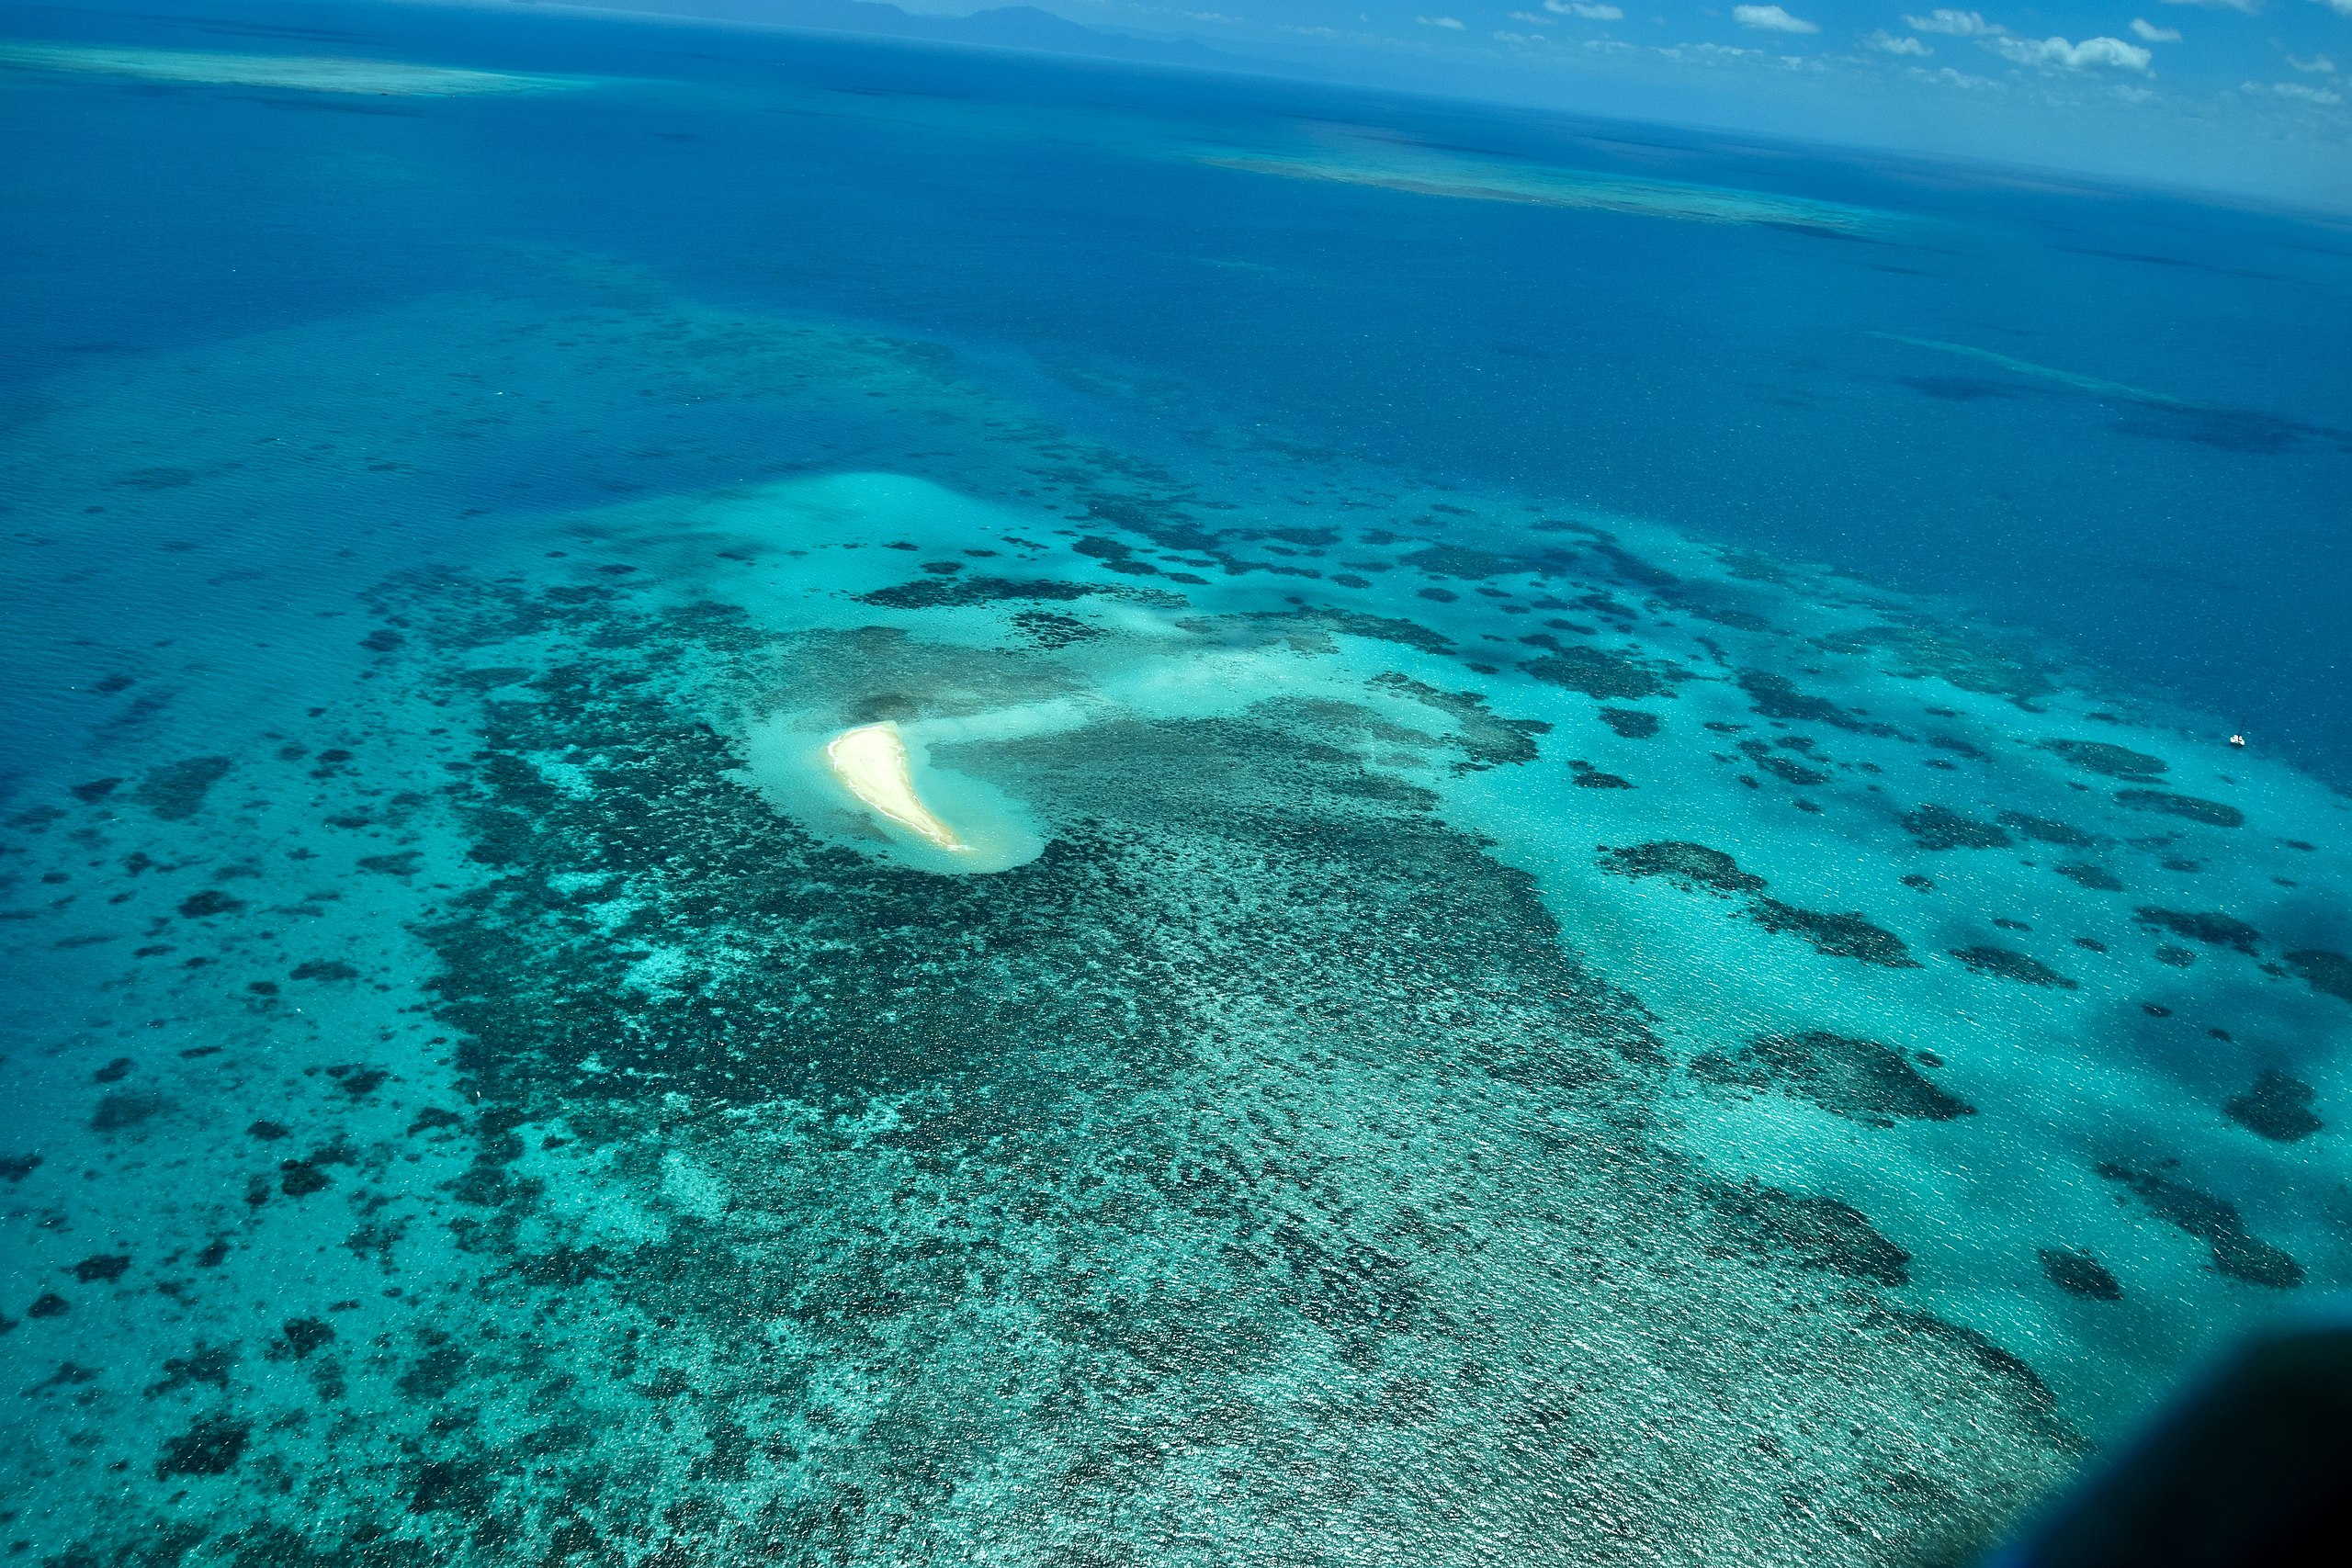 World Heritage Committee agrees not to place Great Barrier Reef on ‘in danger’ list